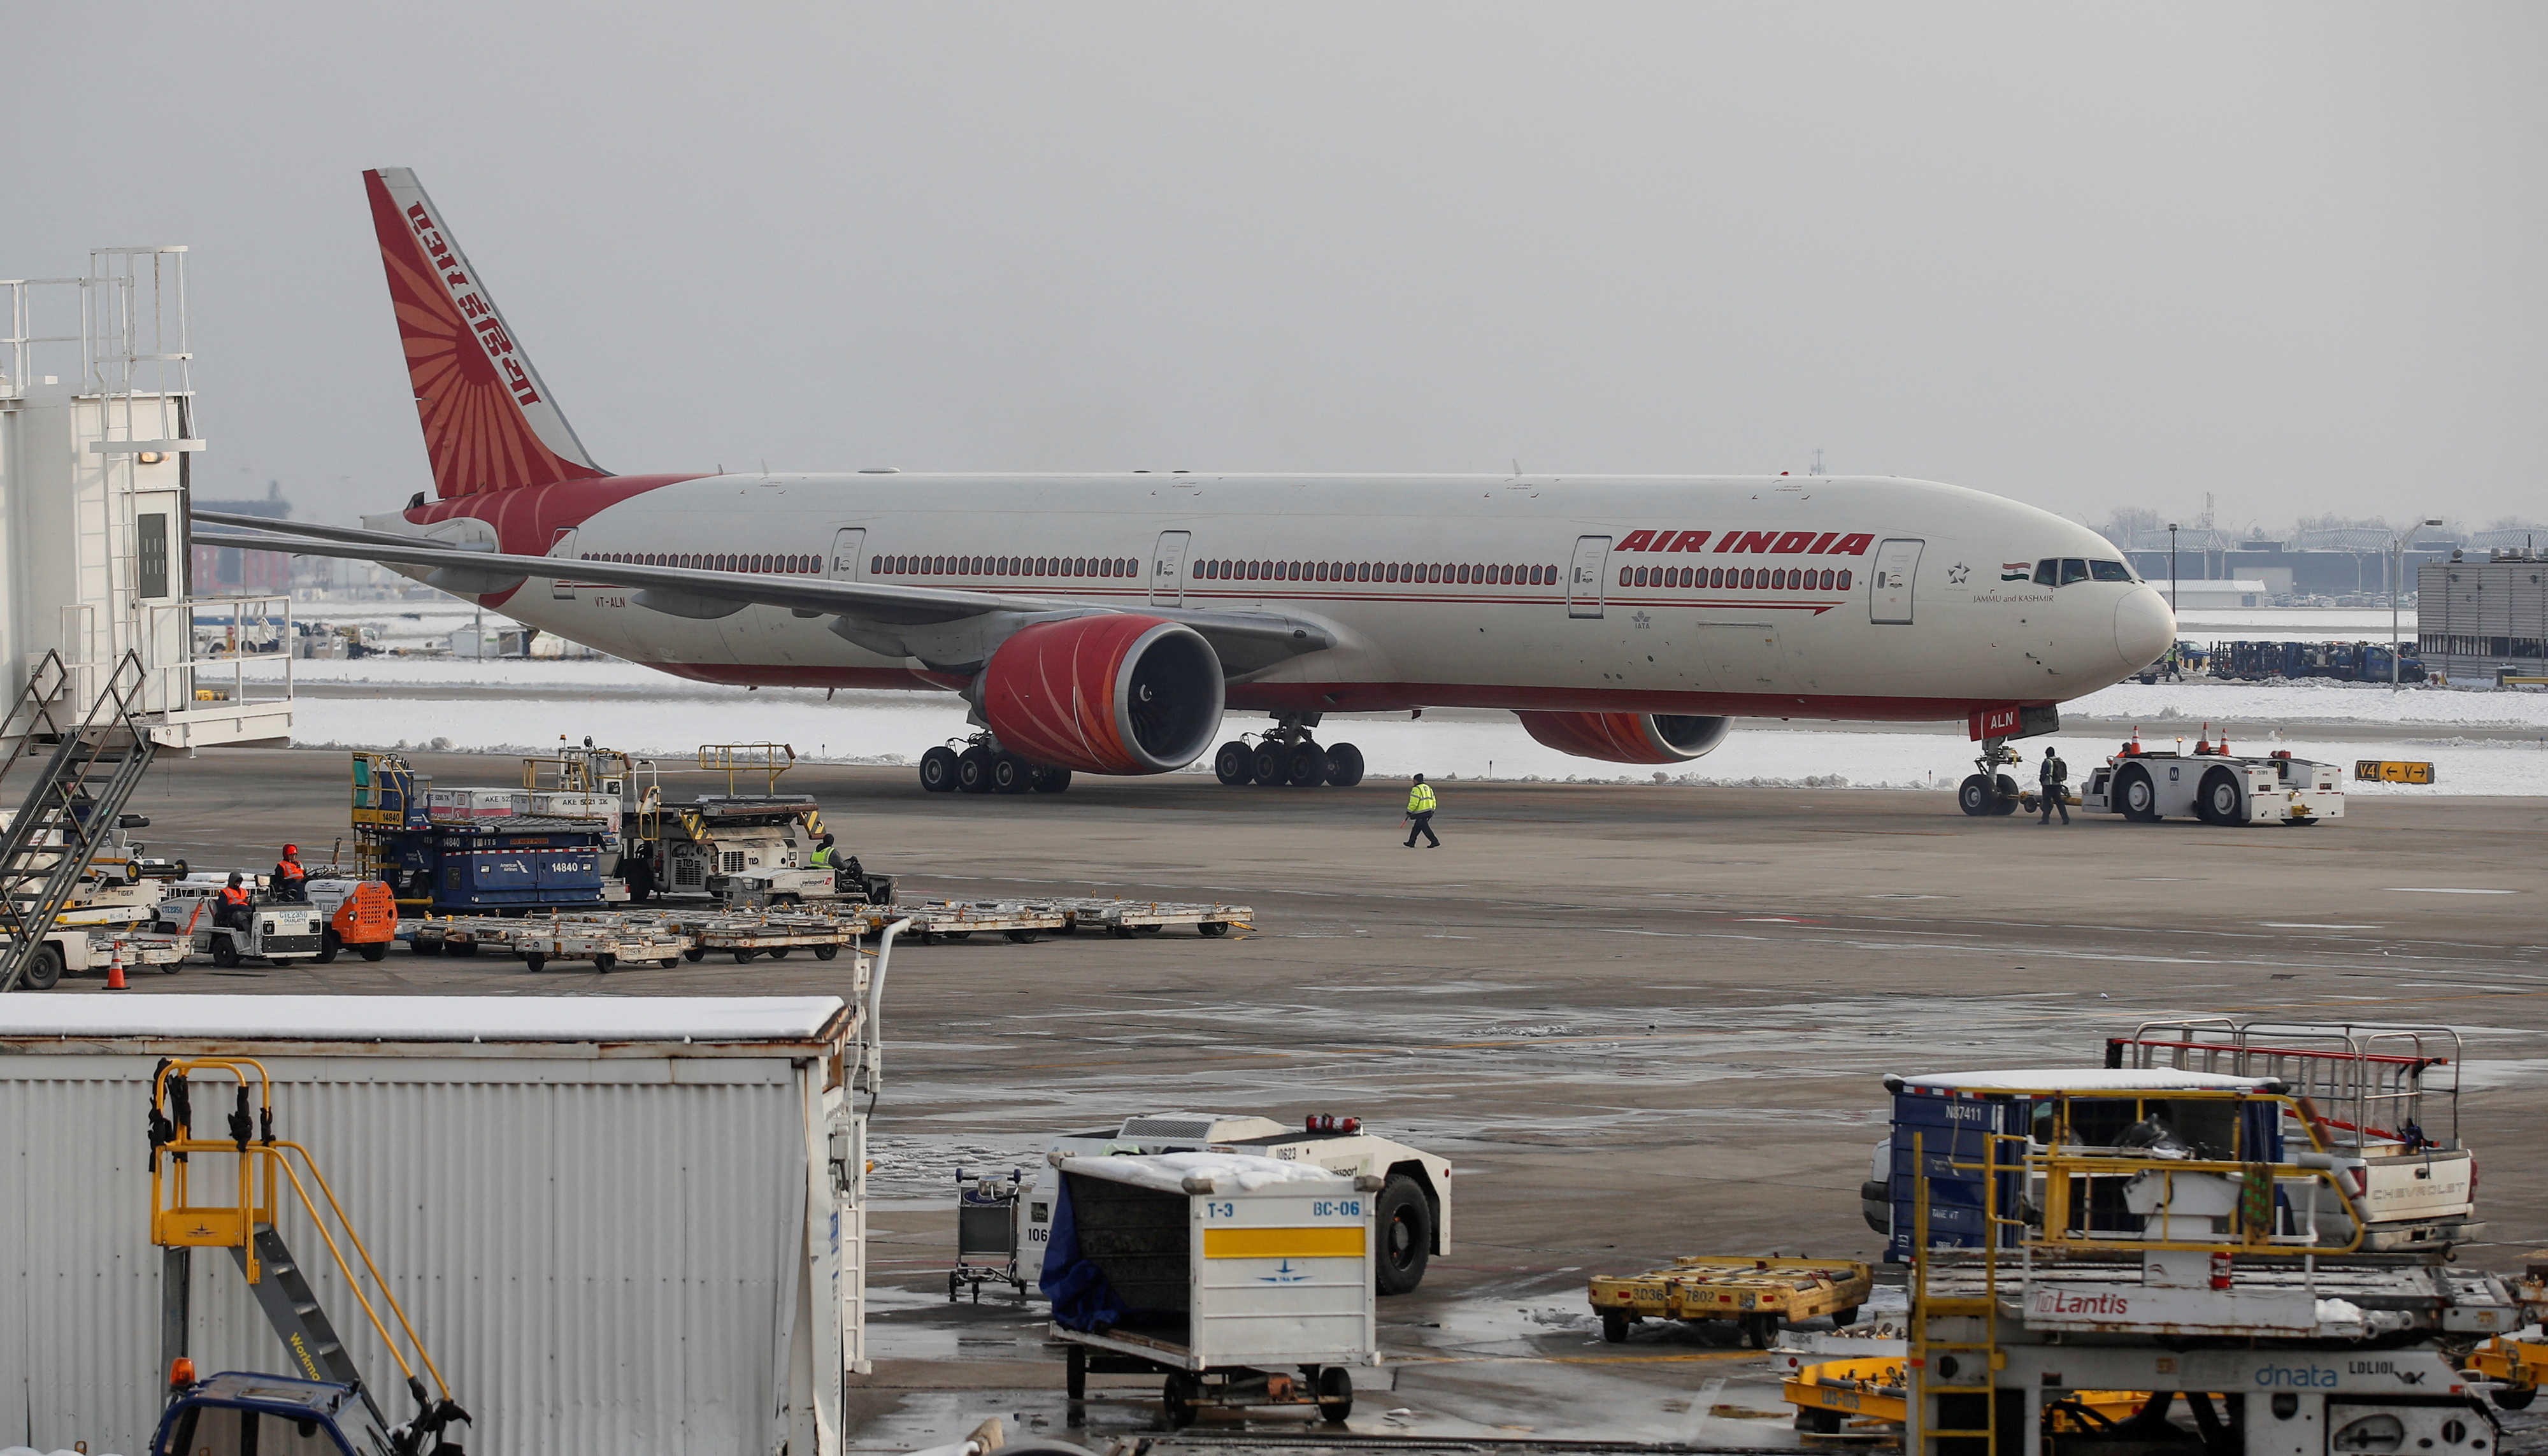 An Air India Boeing 777 plane is towed at O'Hare International Airport in Chicago